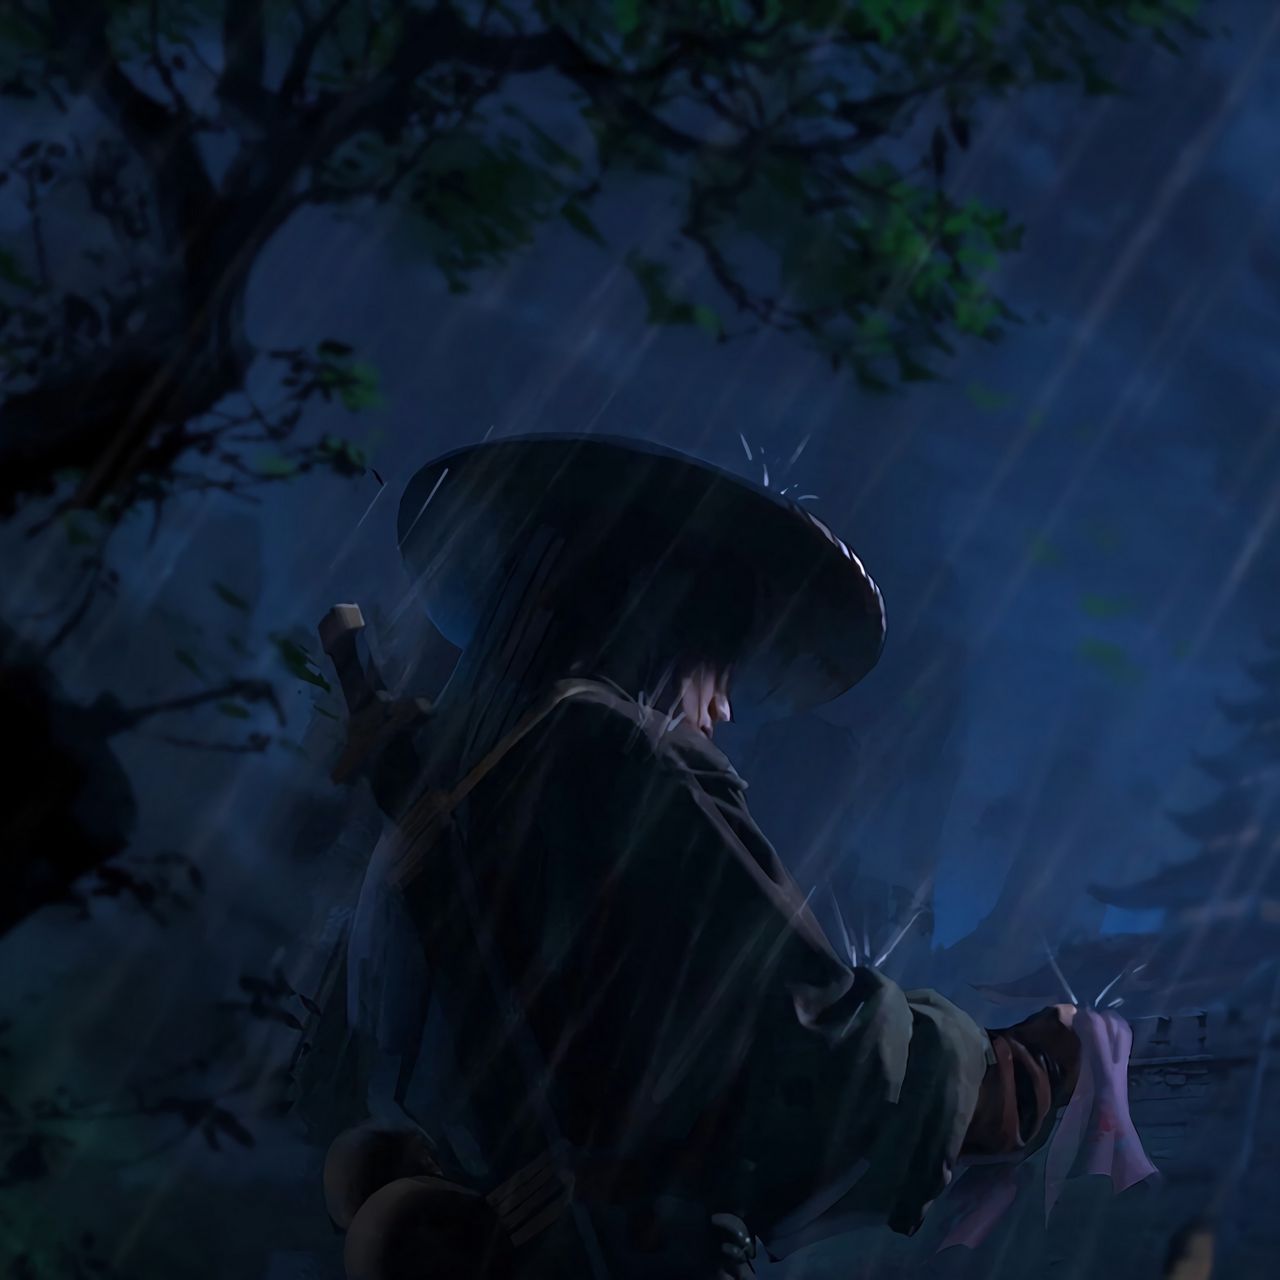 An animated character with a black hat holding a umbrella in the rain. - Samurai